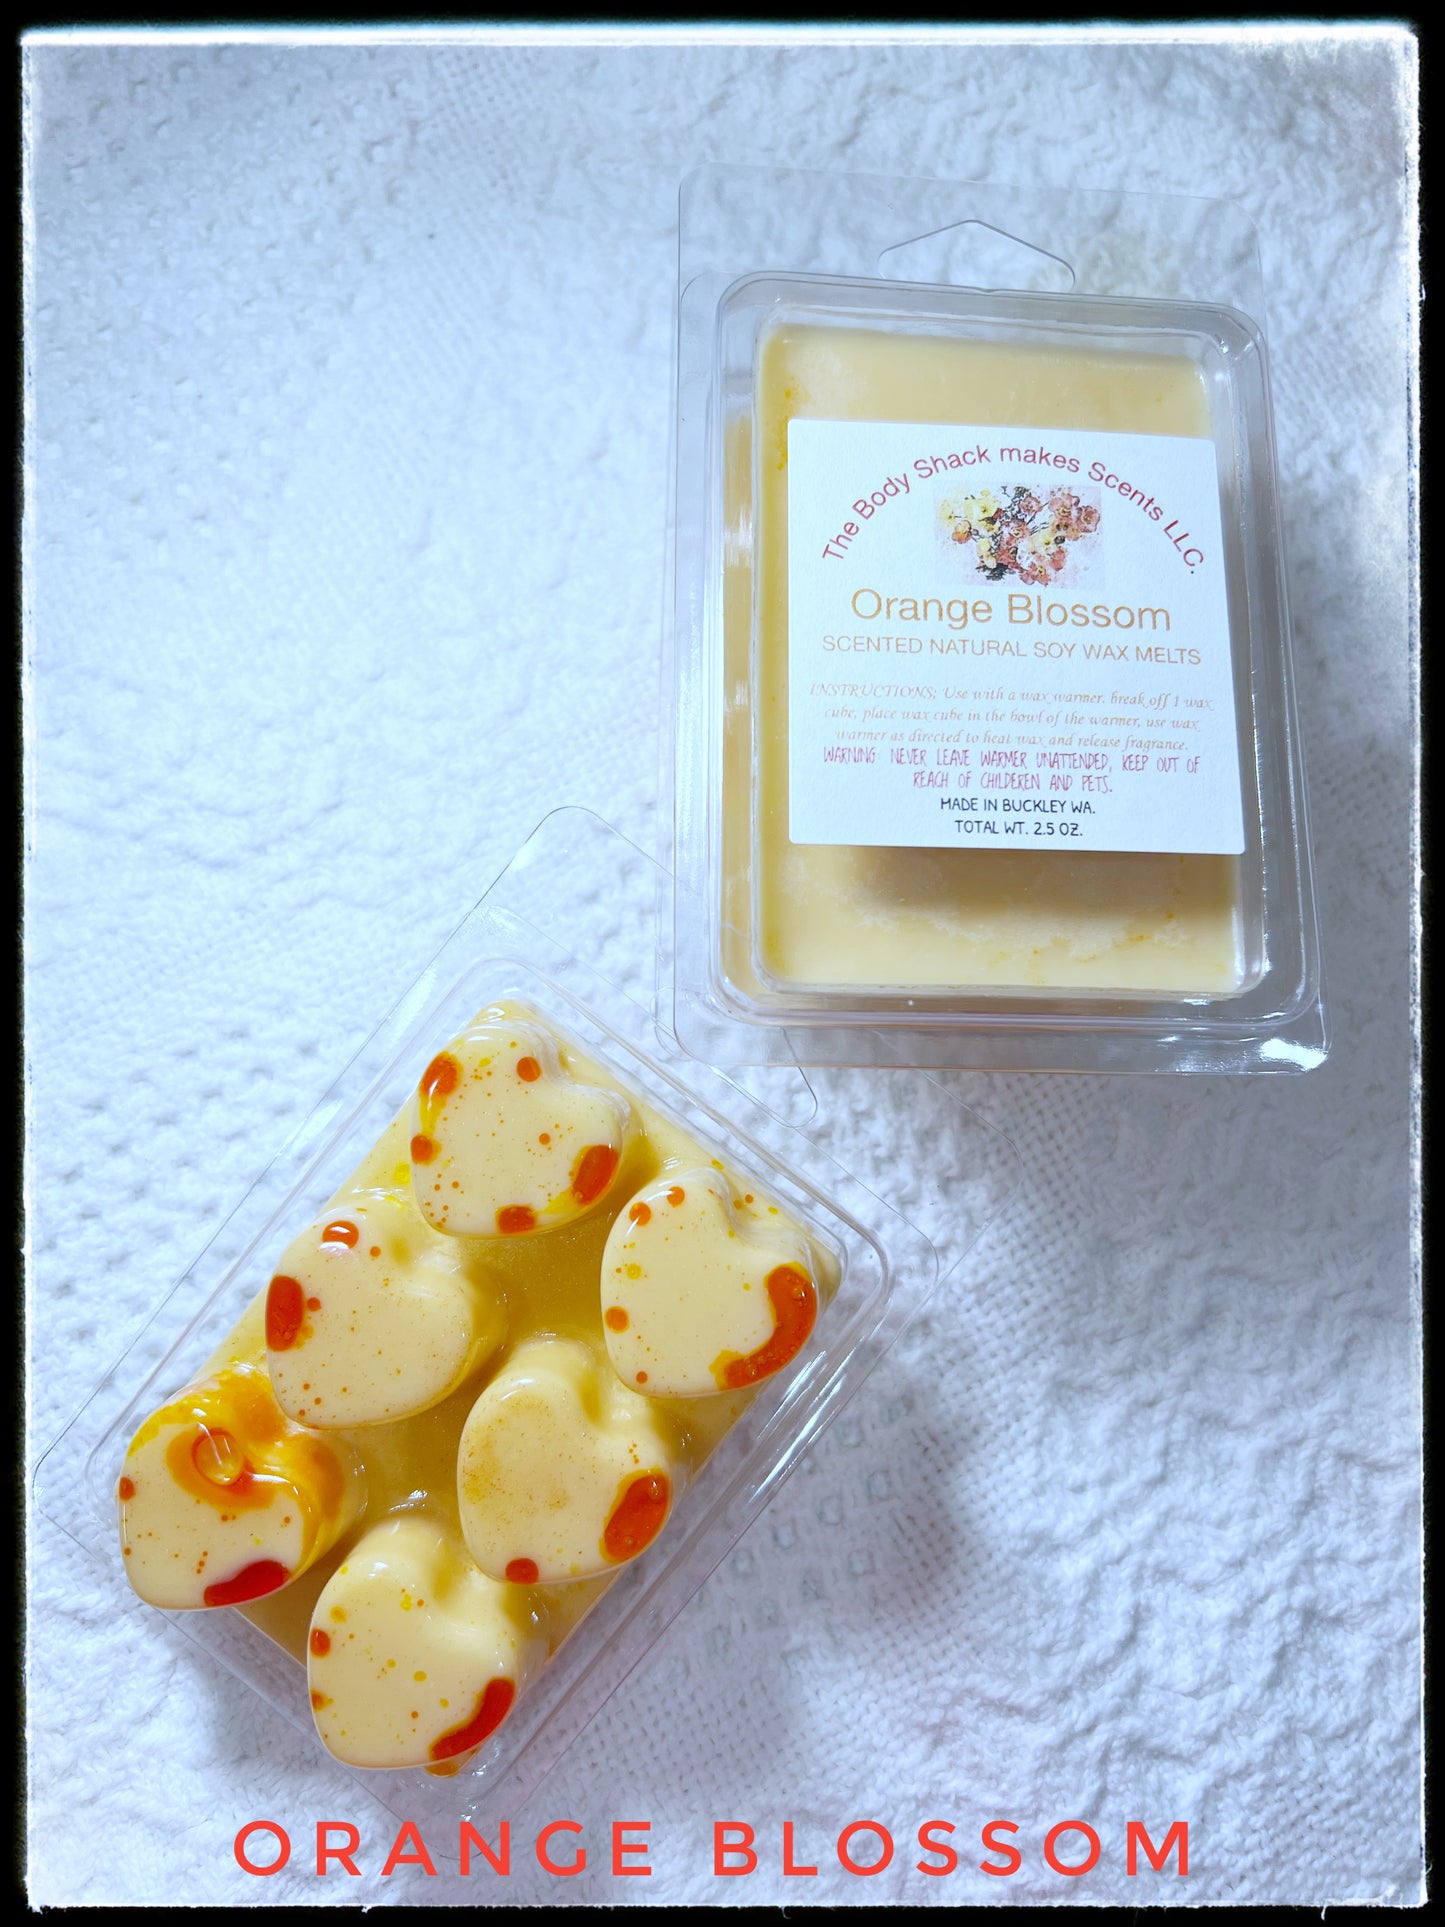 Scented Natural Soy Wax Melts